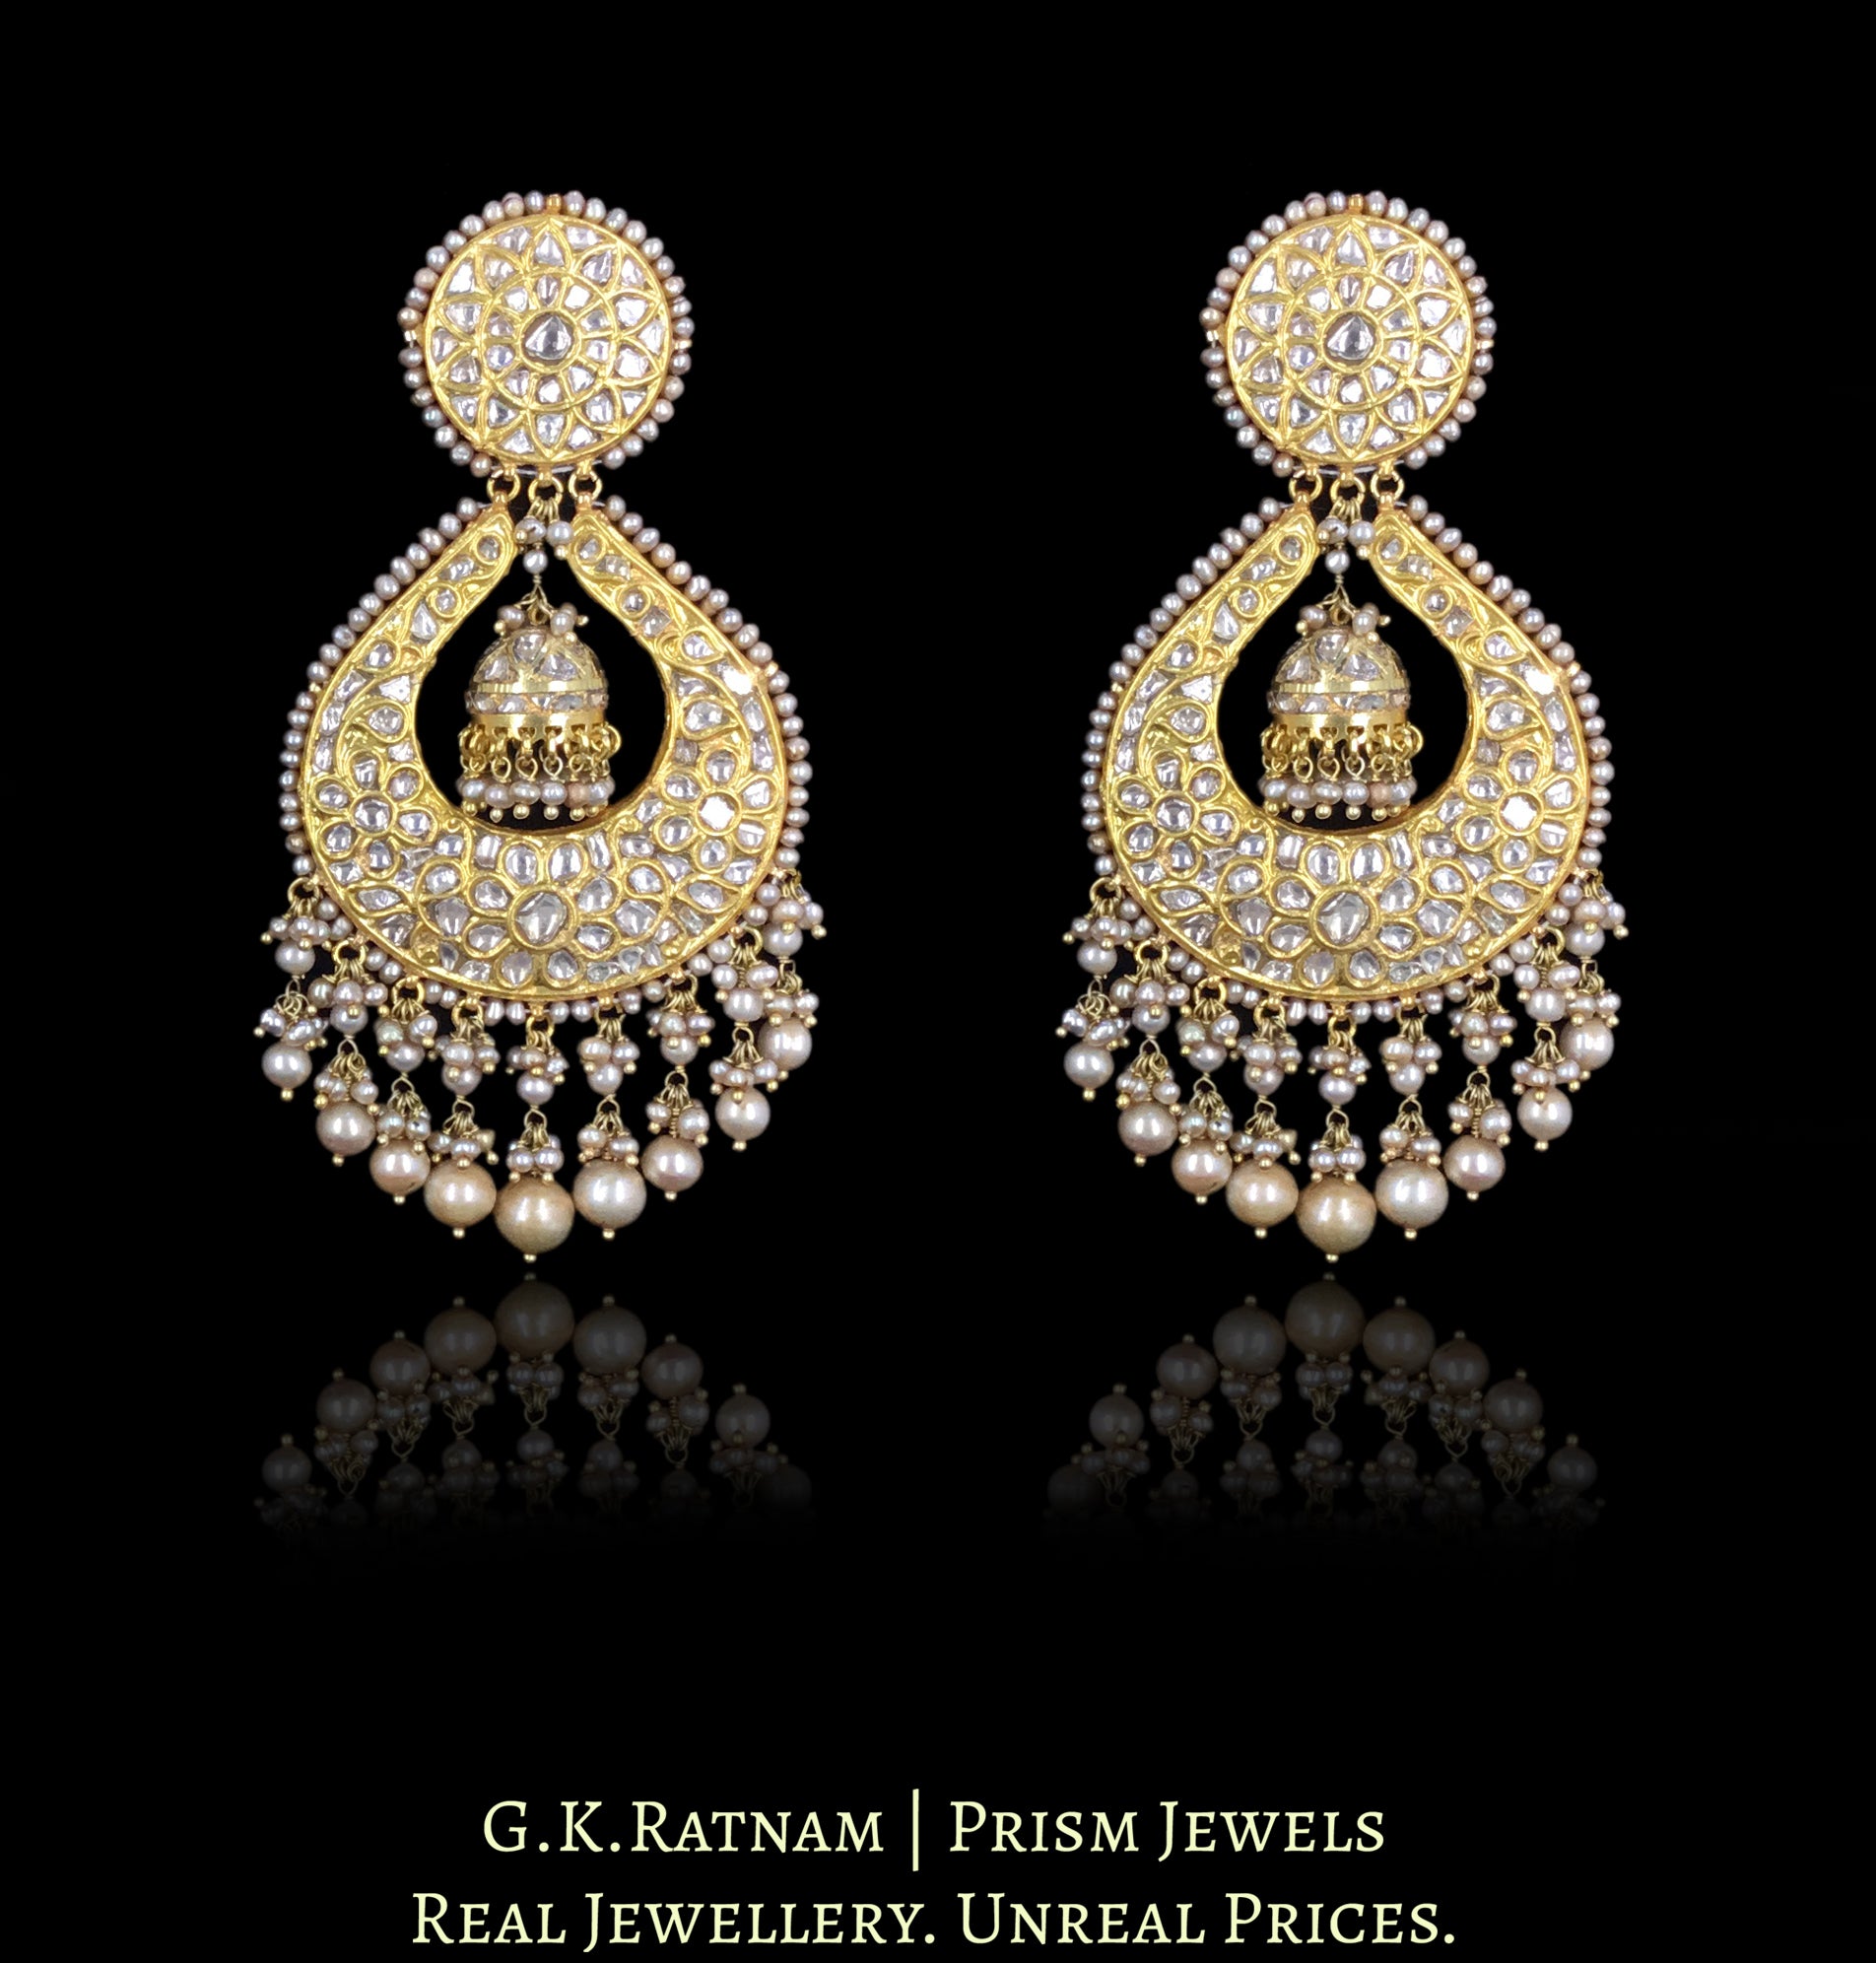 23k Gold and Diamond Polki Chand Bali Earring Pair with Small Jhumkis